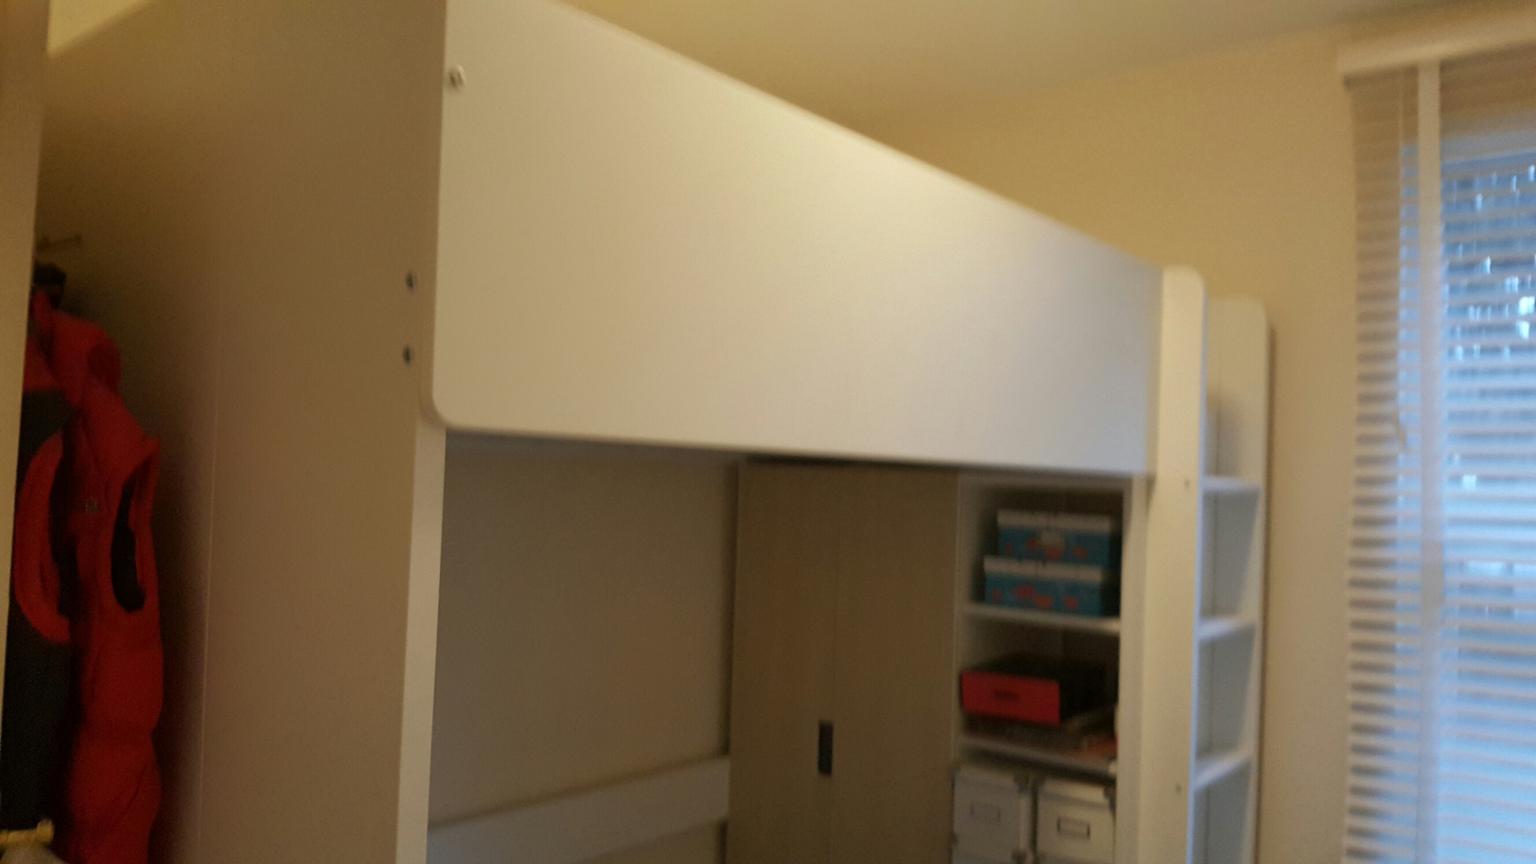 ikea loft bed with desk and wardrobe